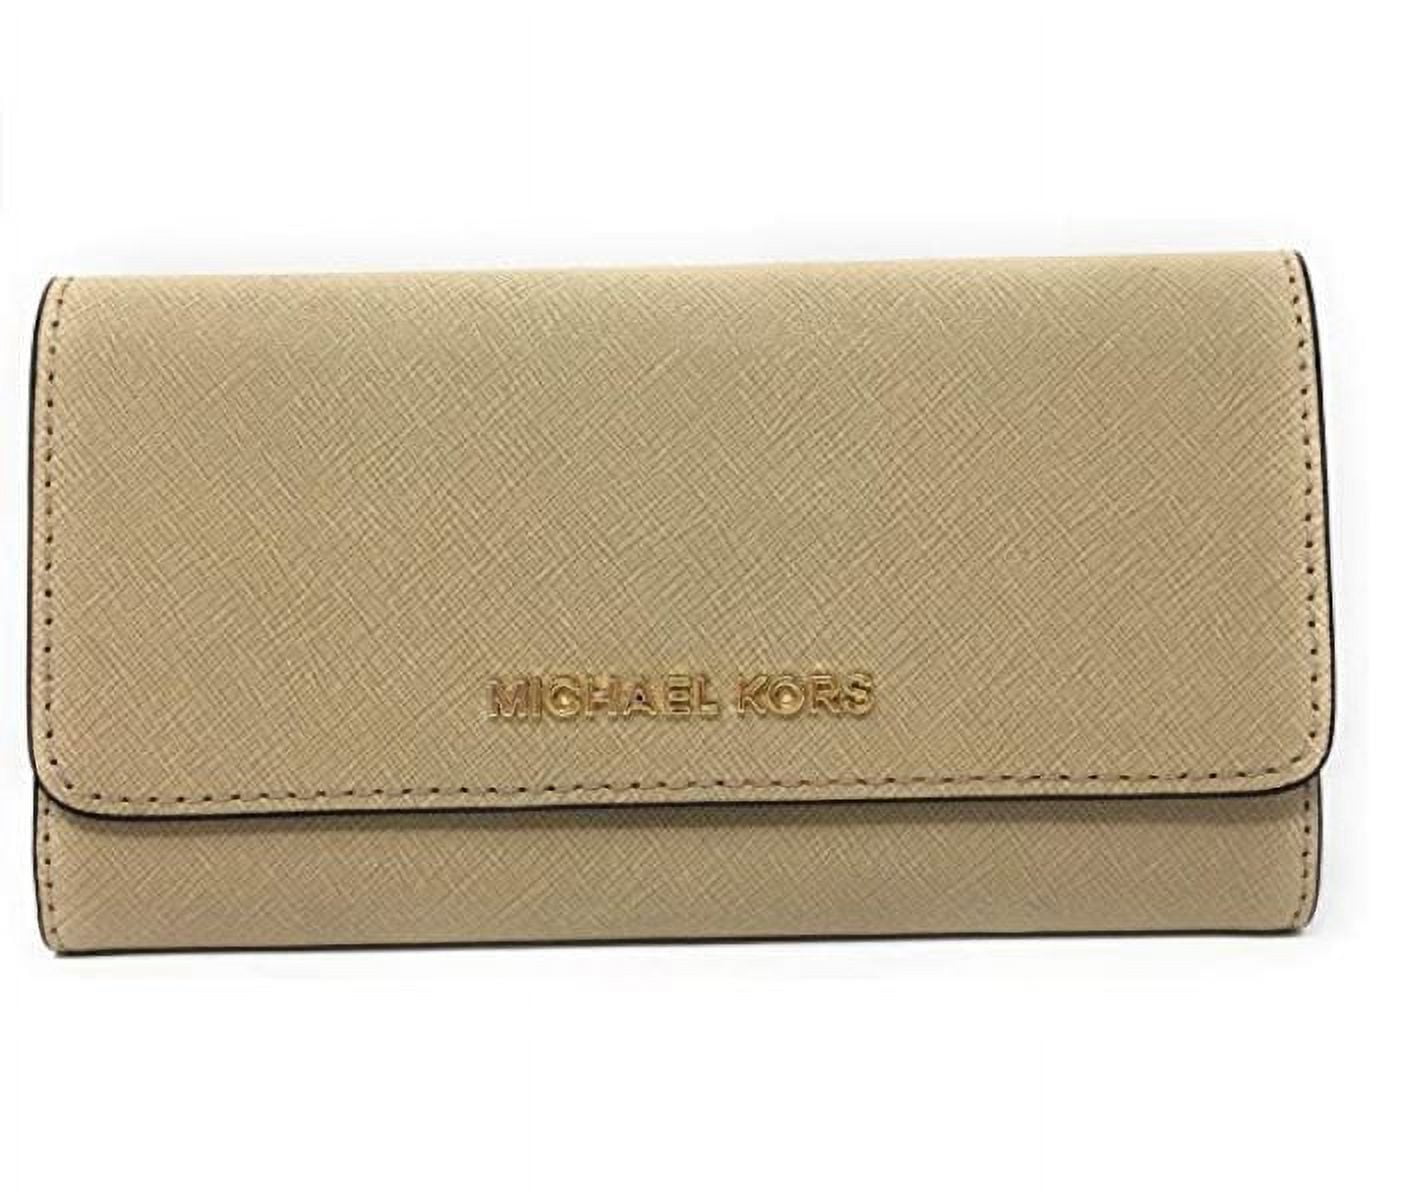 Michael Kors Women Lady PVC or Leather Trifold Clutch Credit Card Holder  Wallet